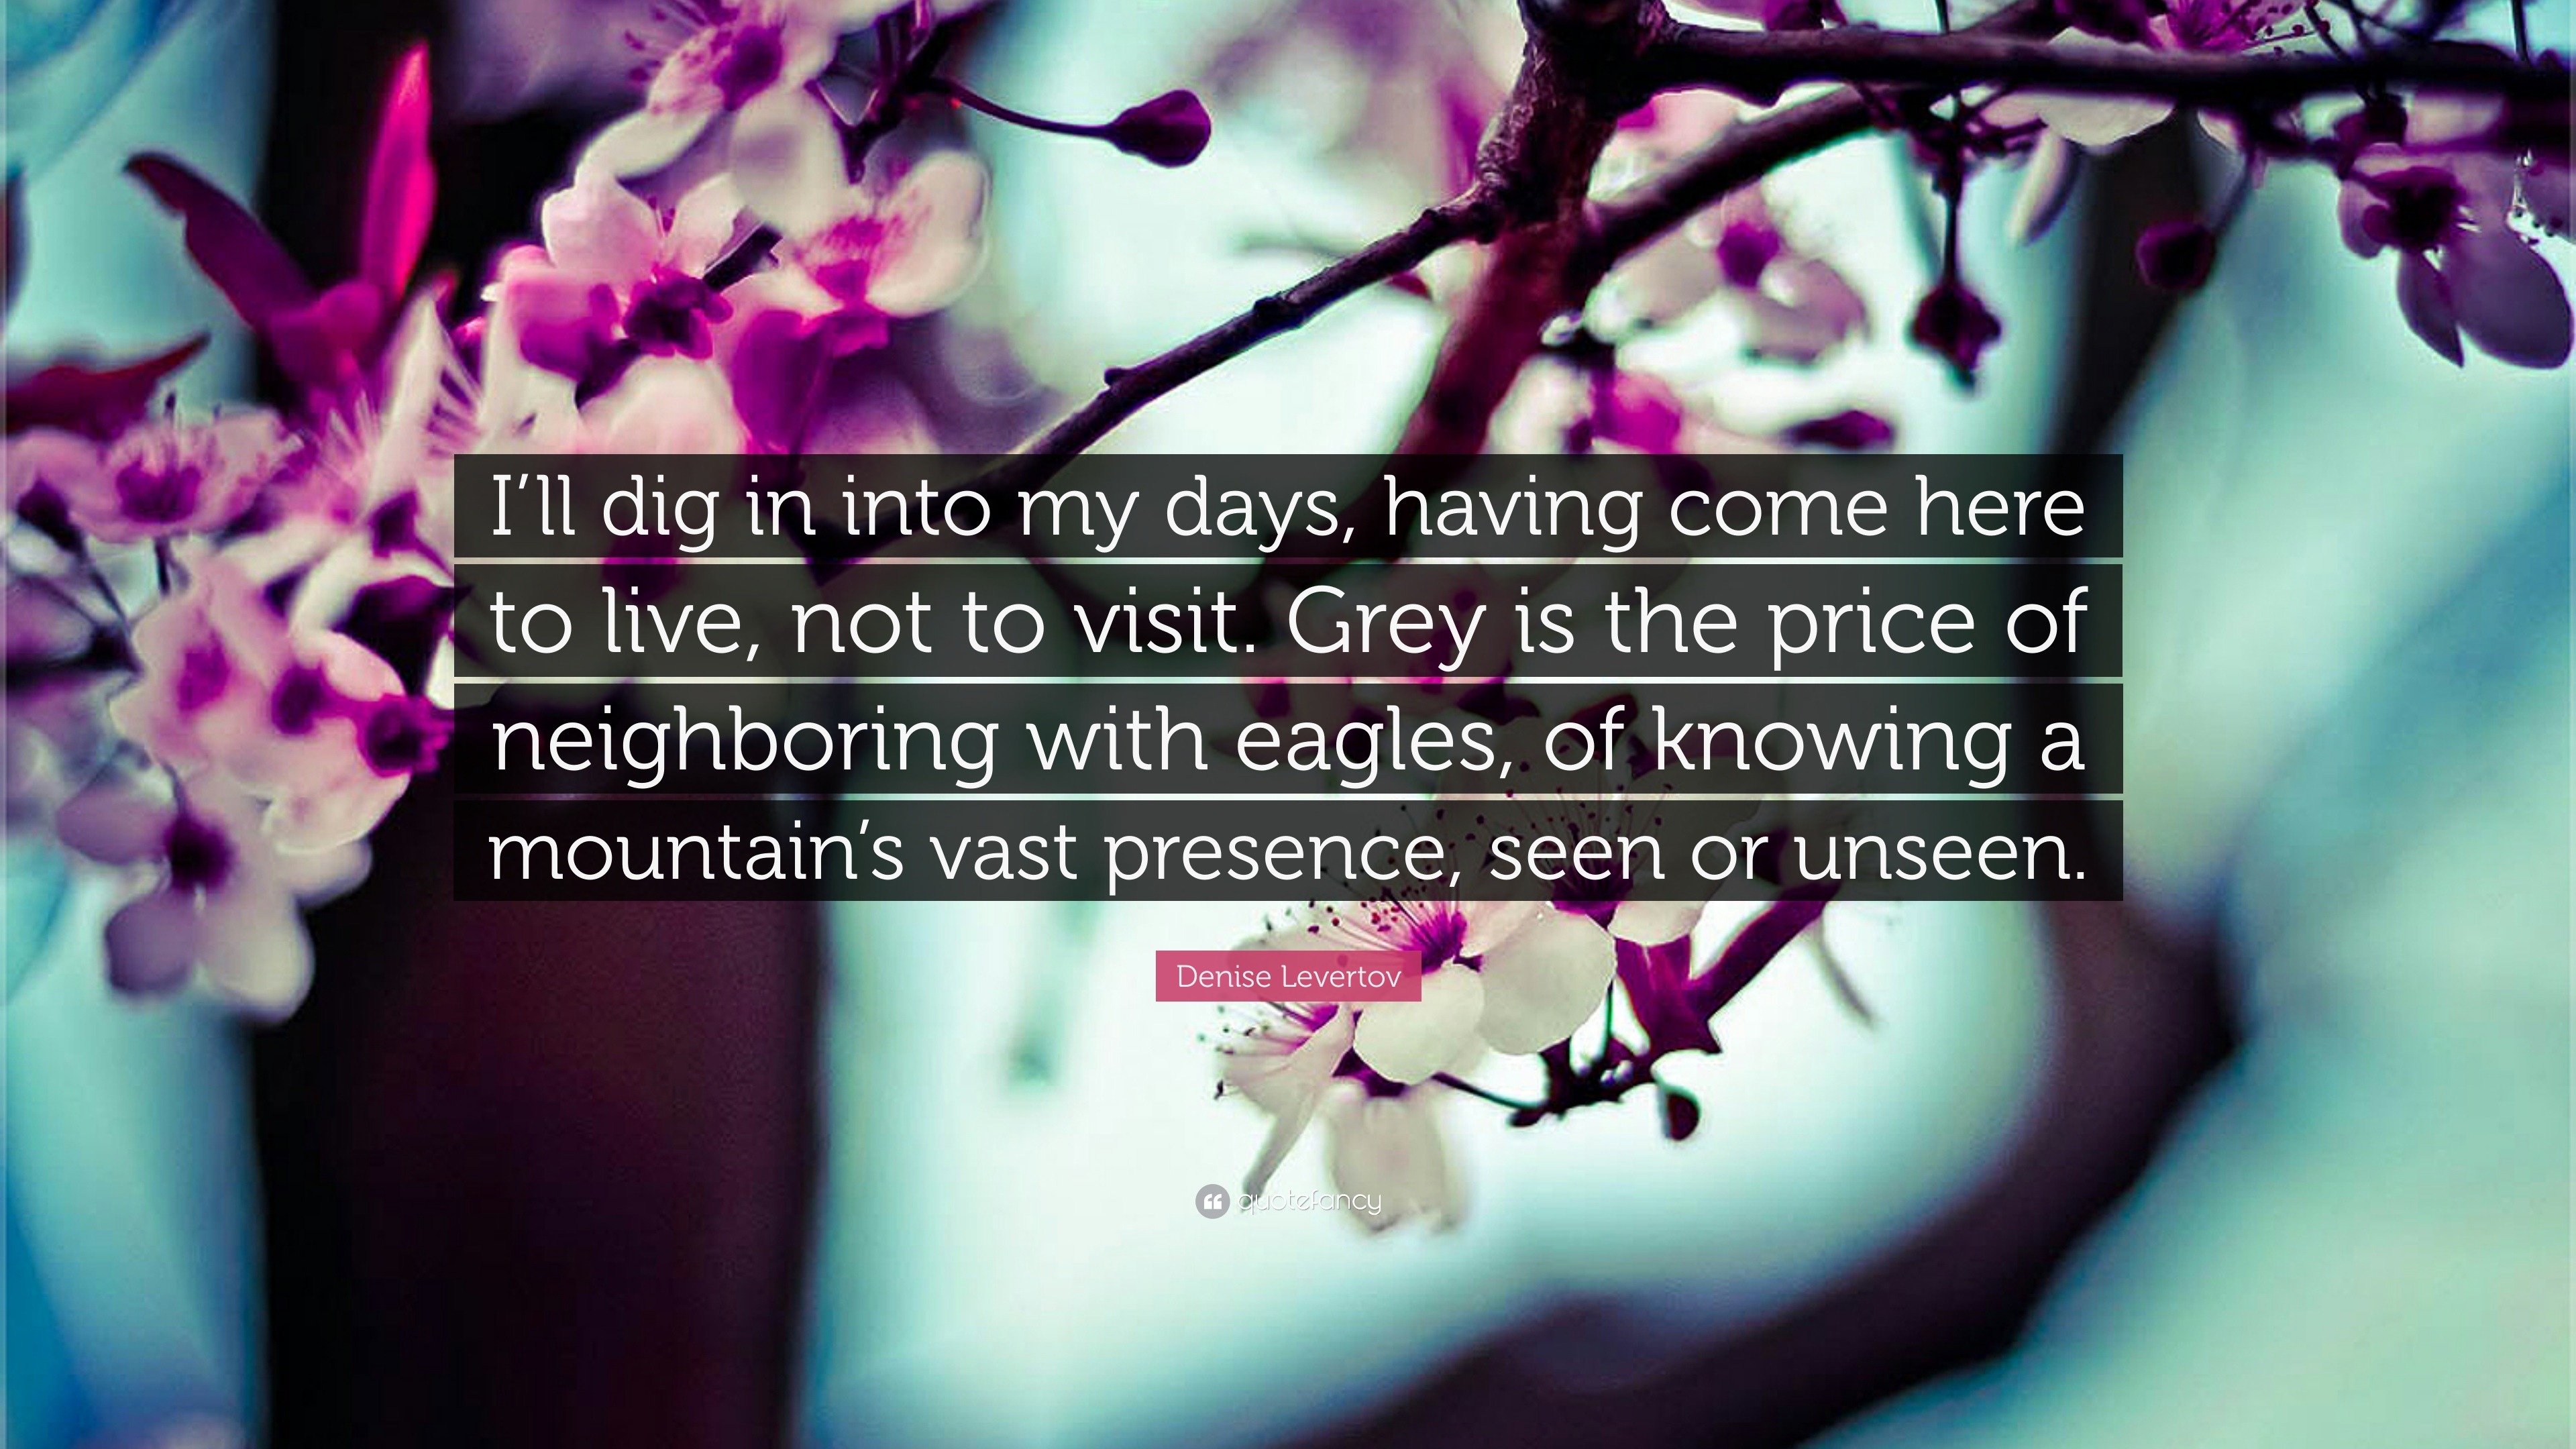 Denise Levertov Quote: “I'll dig in into my days, having come here to live,  not to visit. Grey is the price of neighboring with eagles, of knowi”